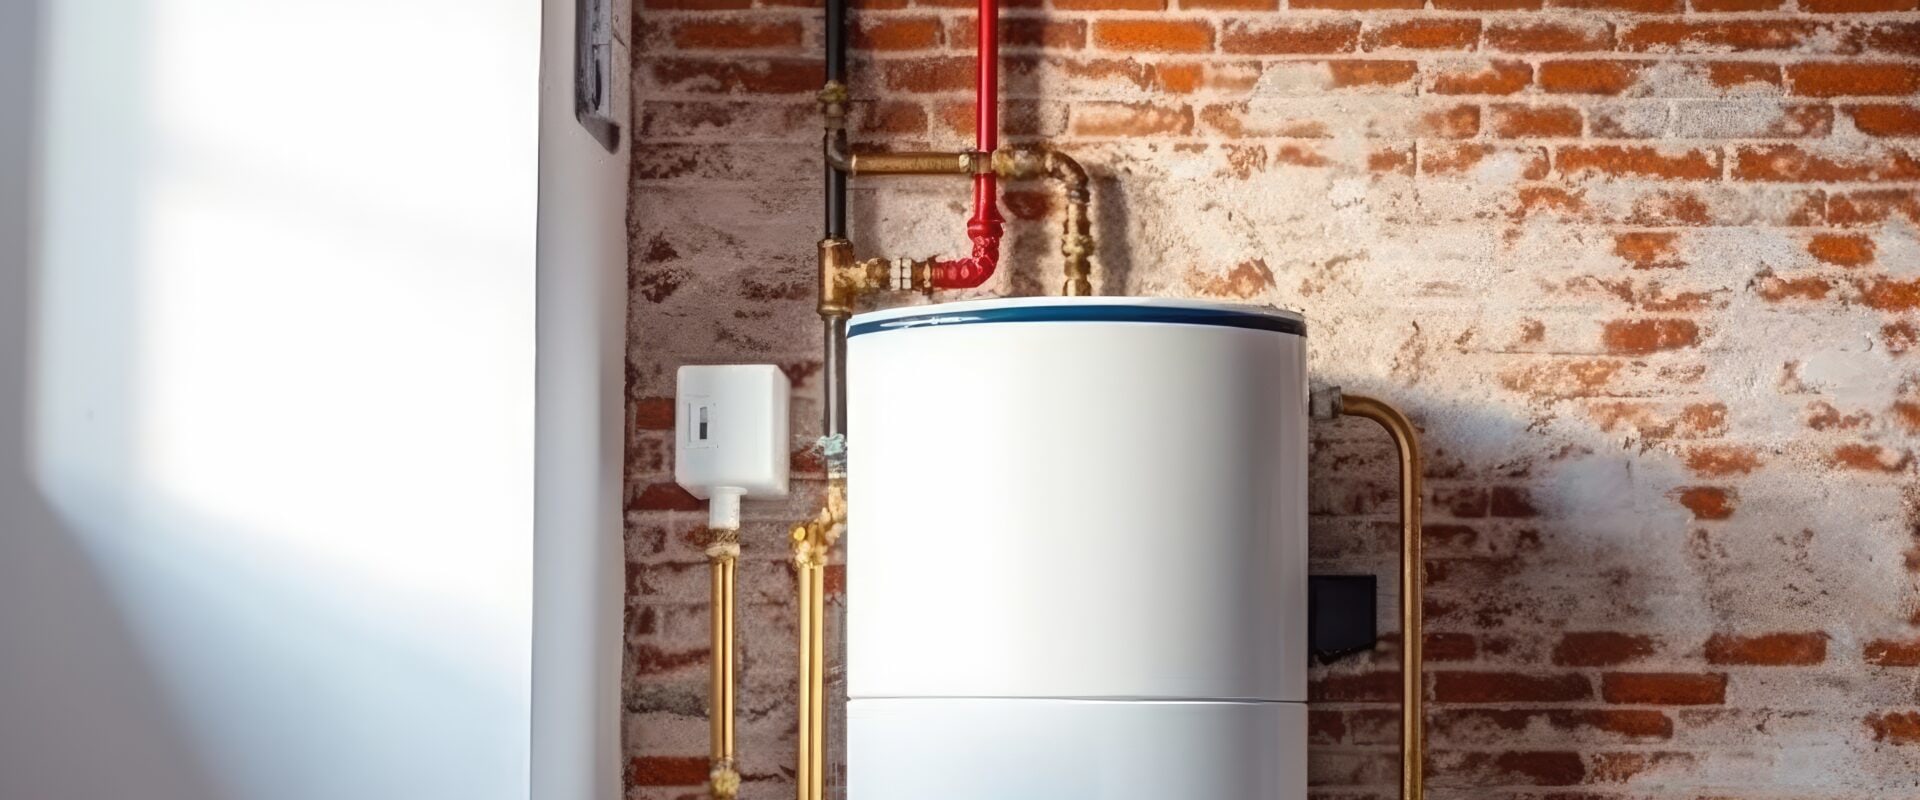 Maximizing Savings: The Cost of Installing a Tankless Water Heater from Home Depot